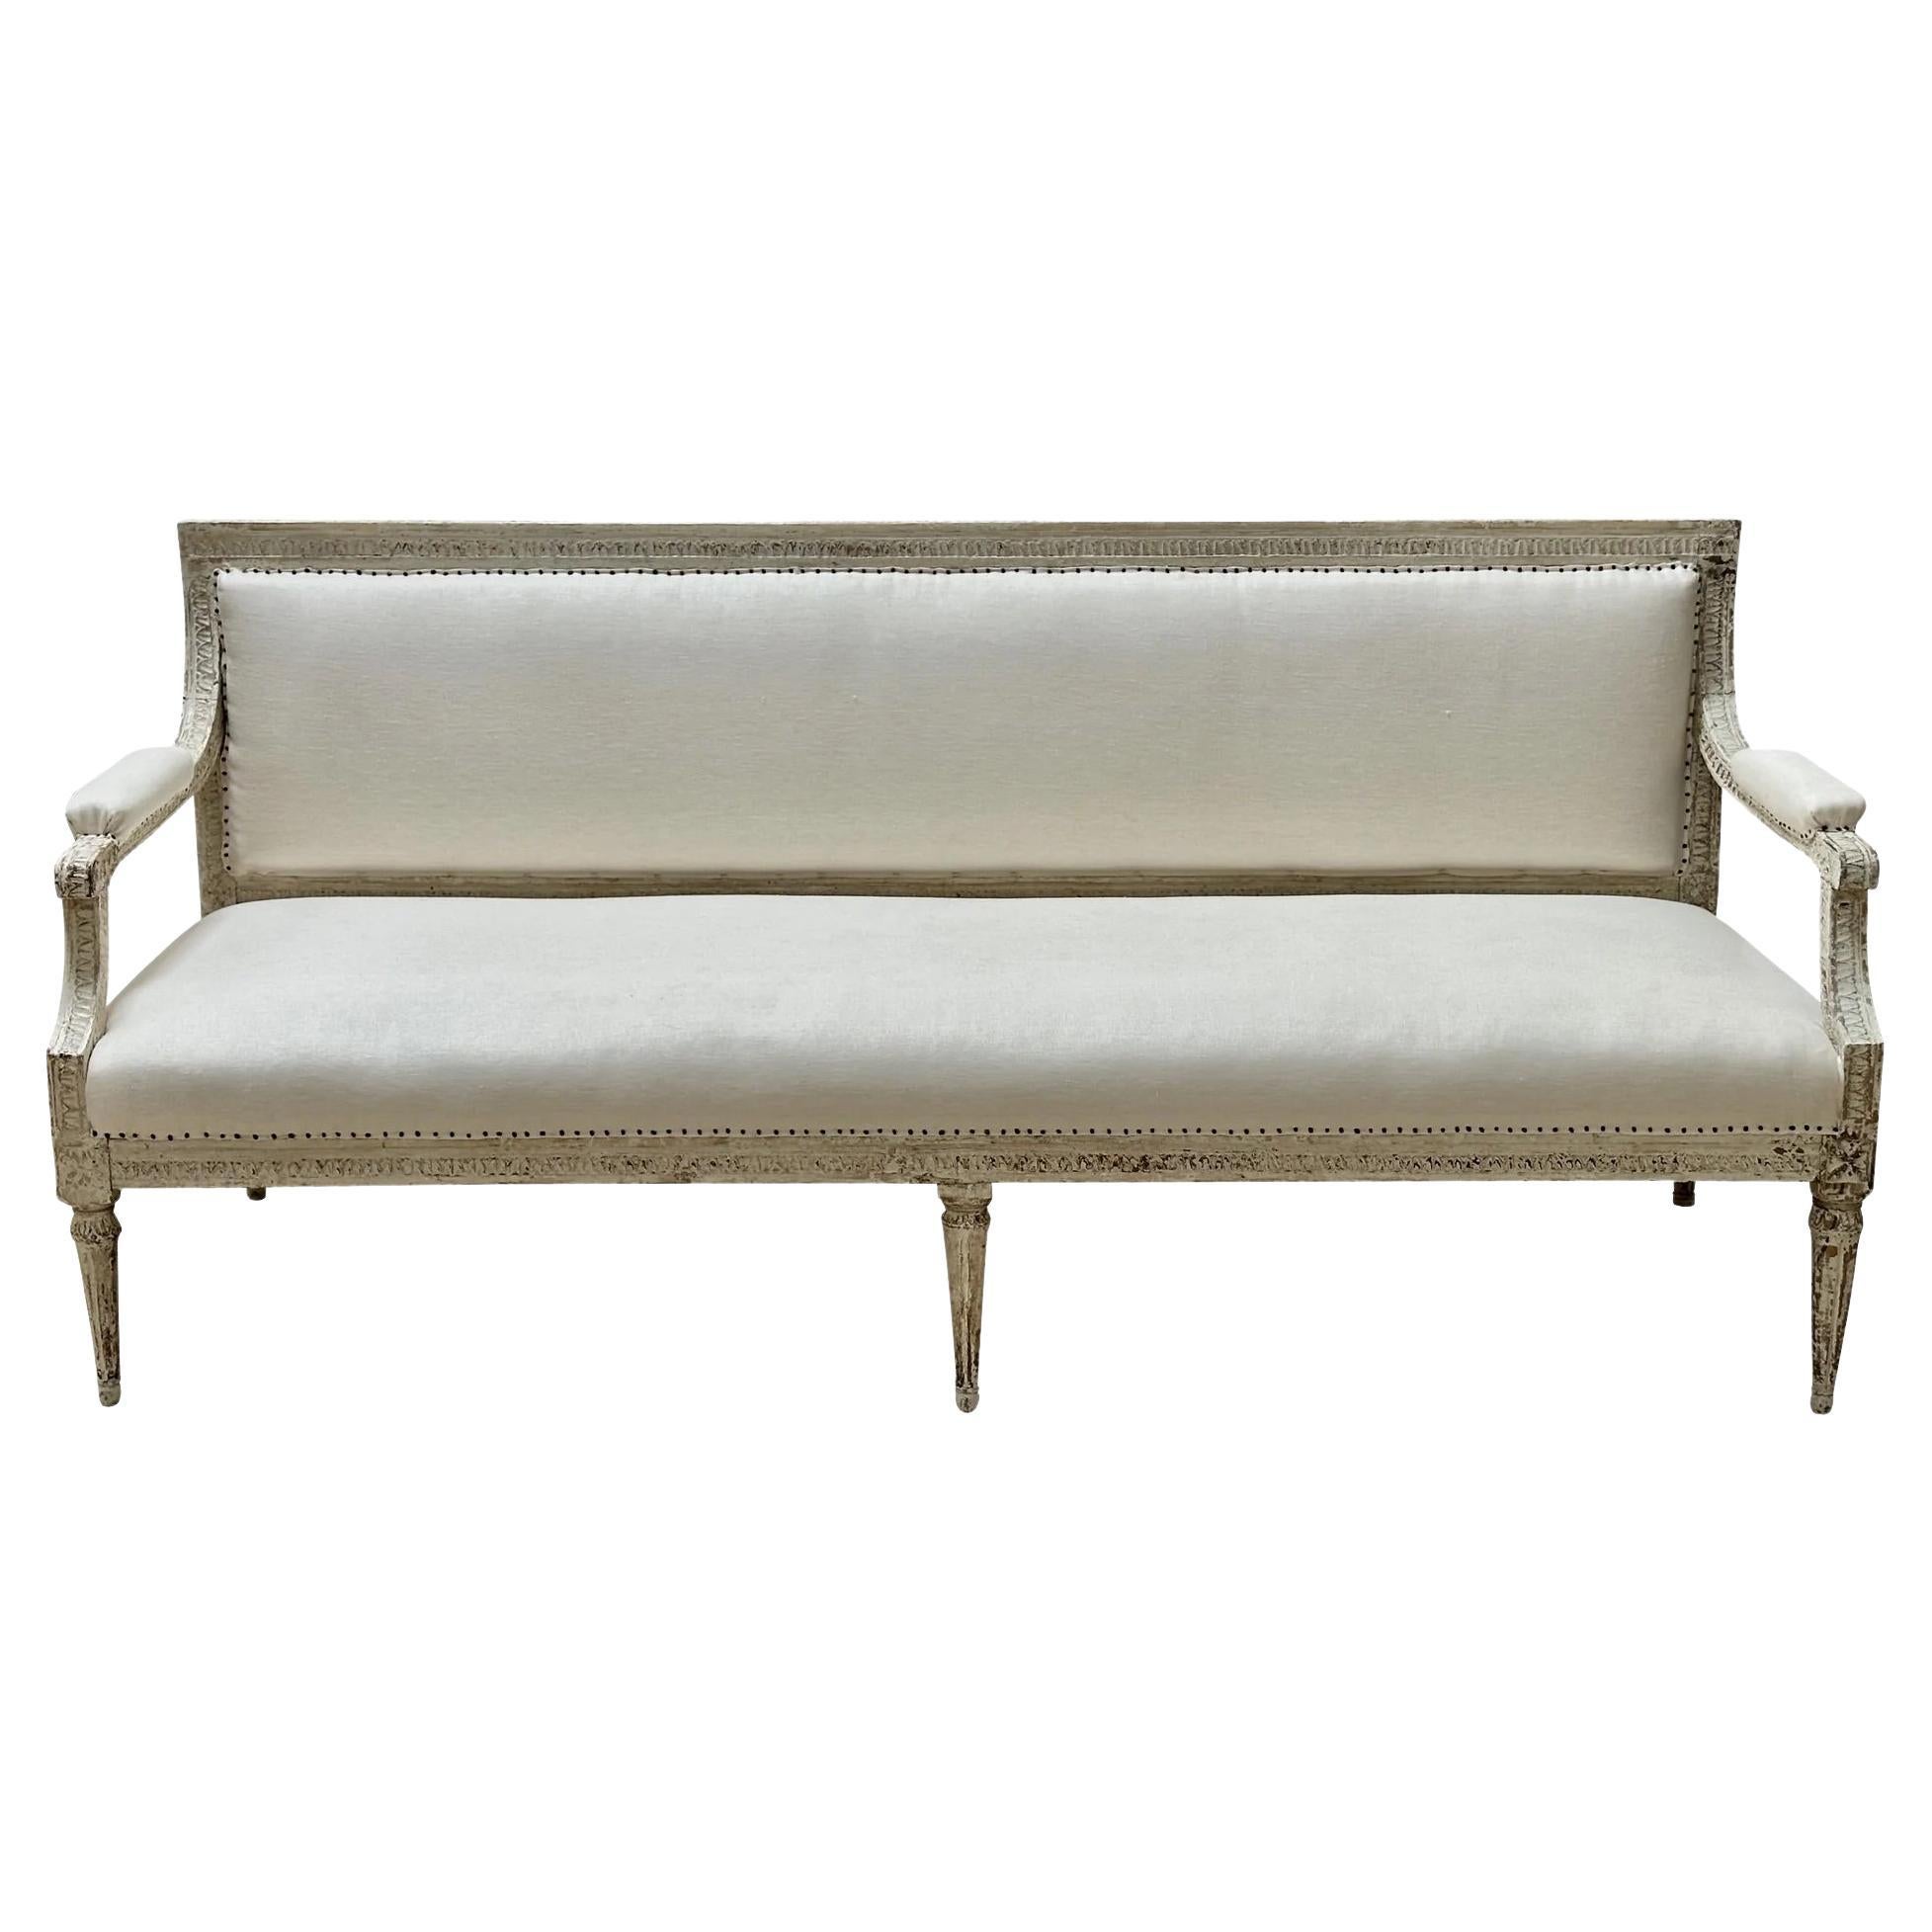 A Swedish Sofa bench Late 18th- 19th century For Sale